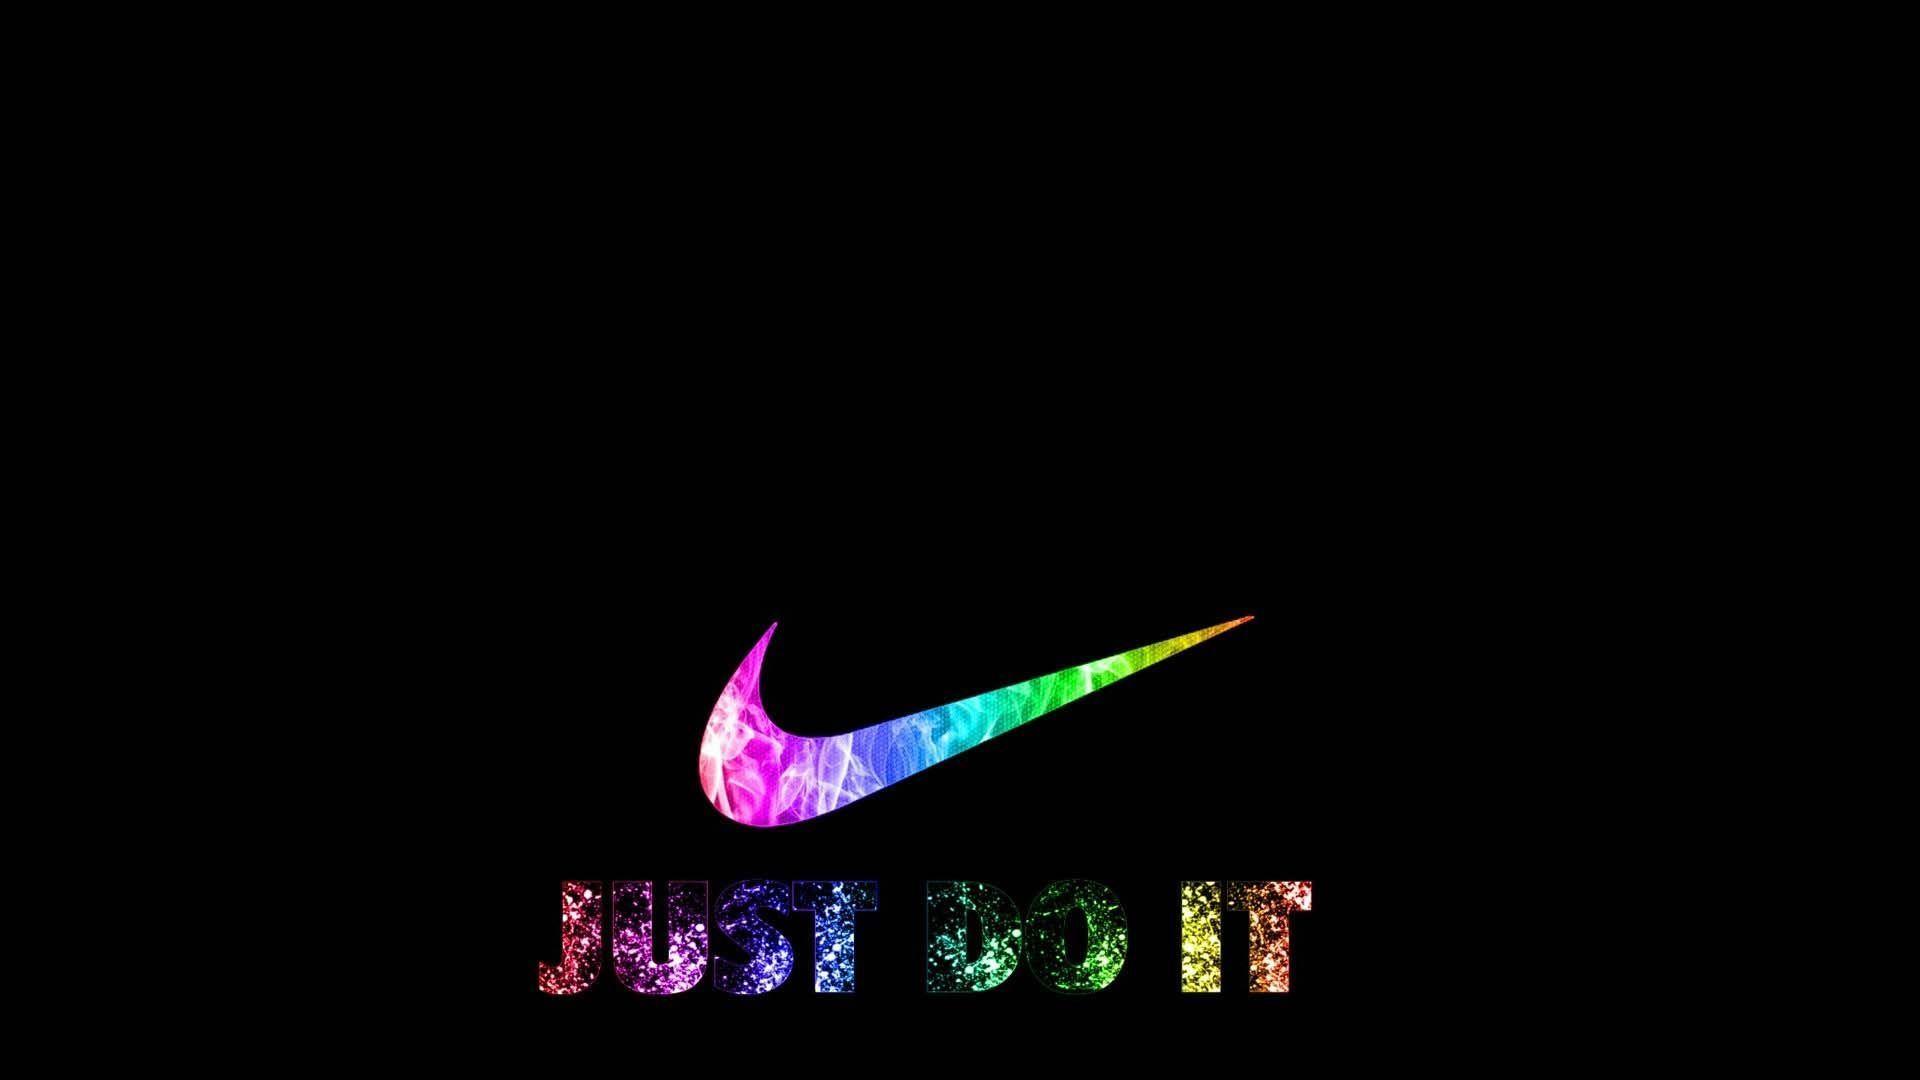 Glow in the Dark Nike Logo - Nike Logo Just Do It | HD Brands and Logos Wallpapers for Mobile and ...